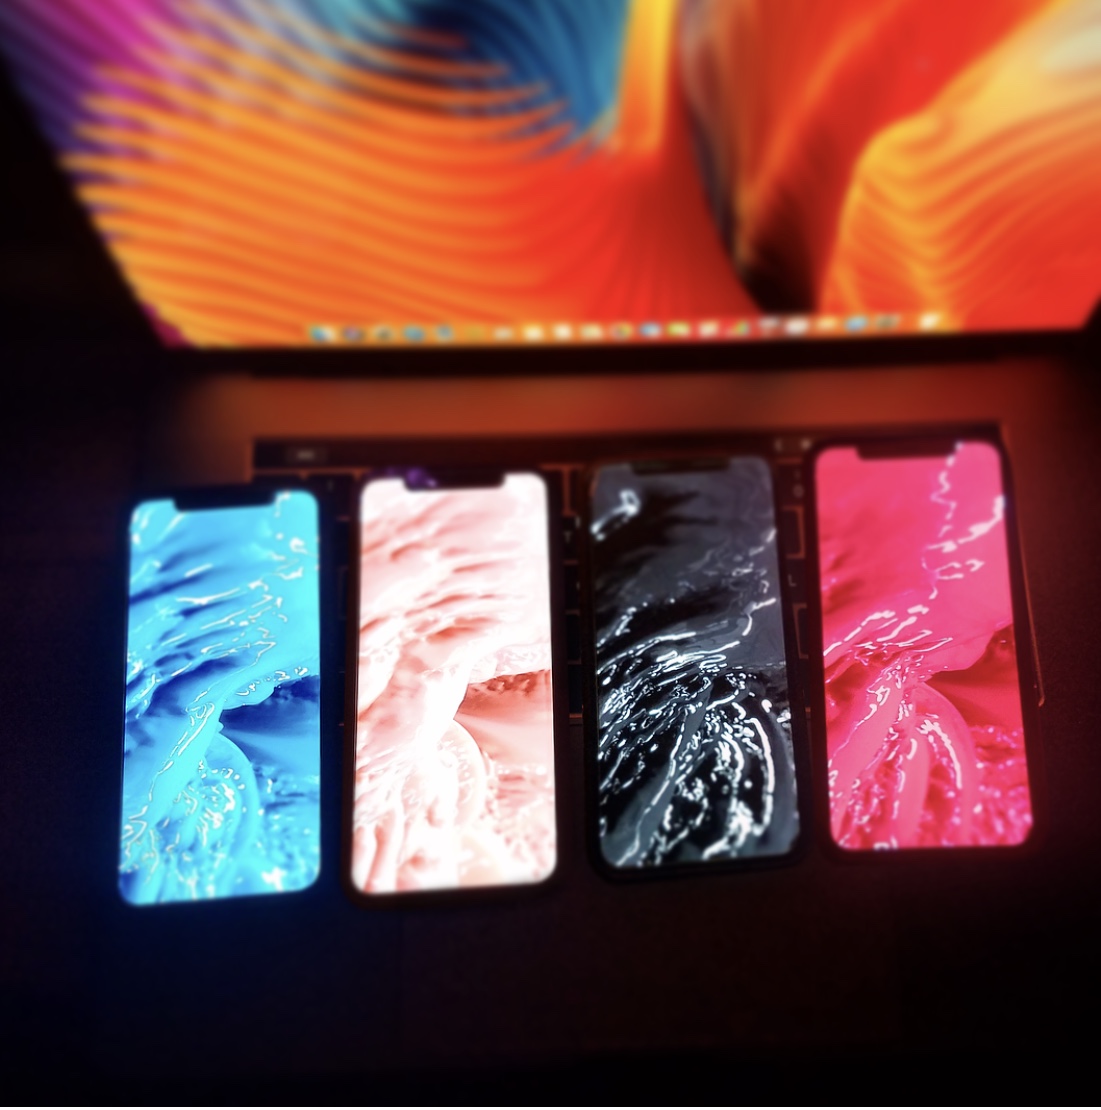 Iphone xs wallpapers â unicorn apps